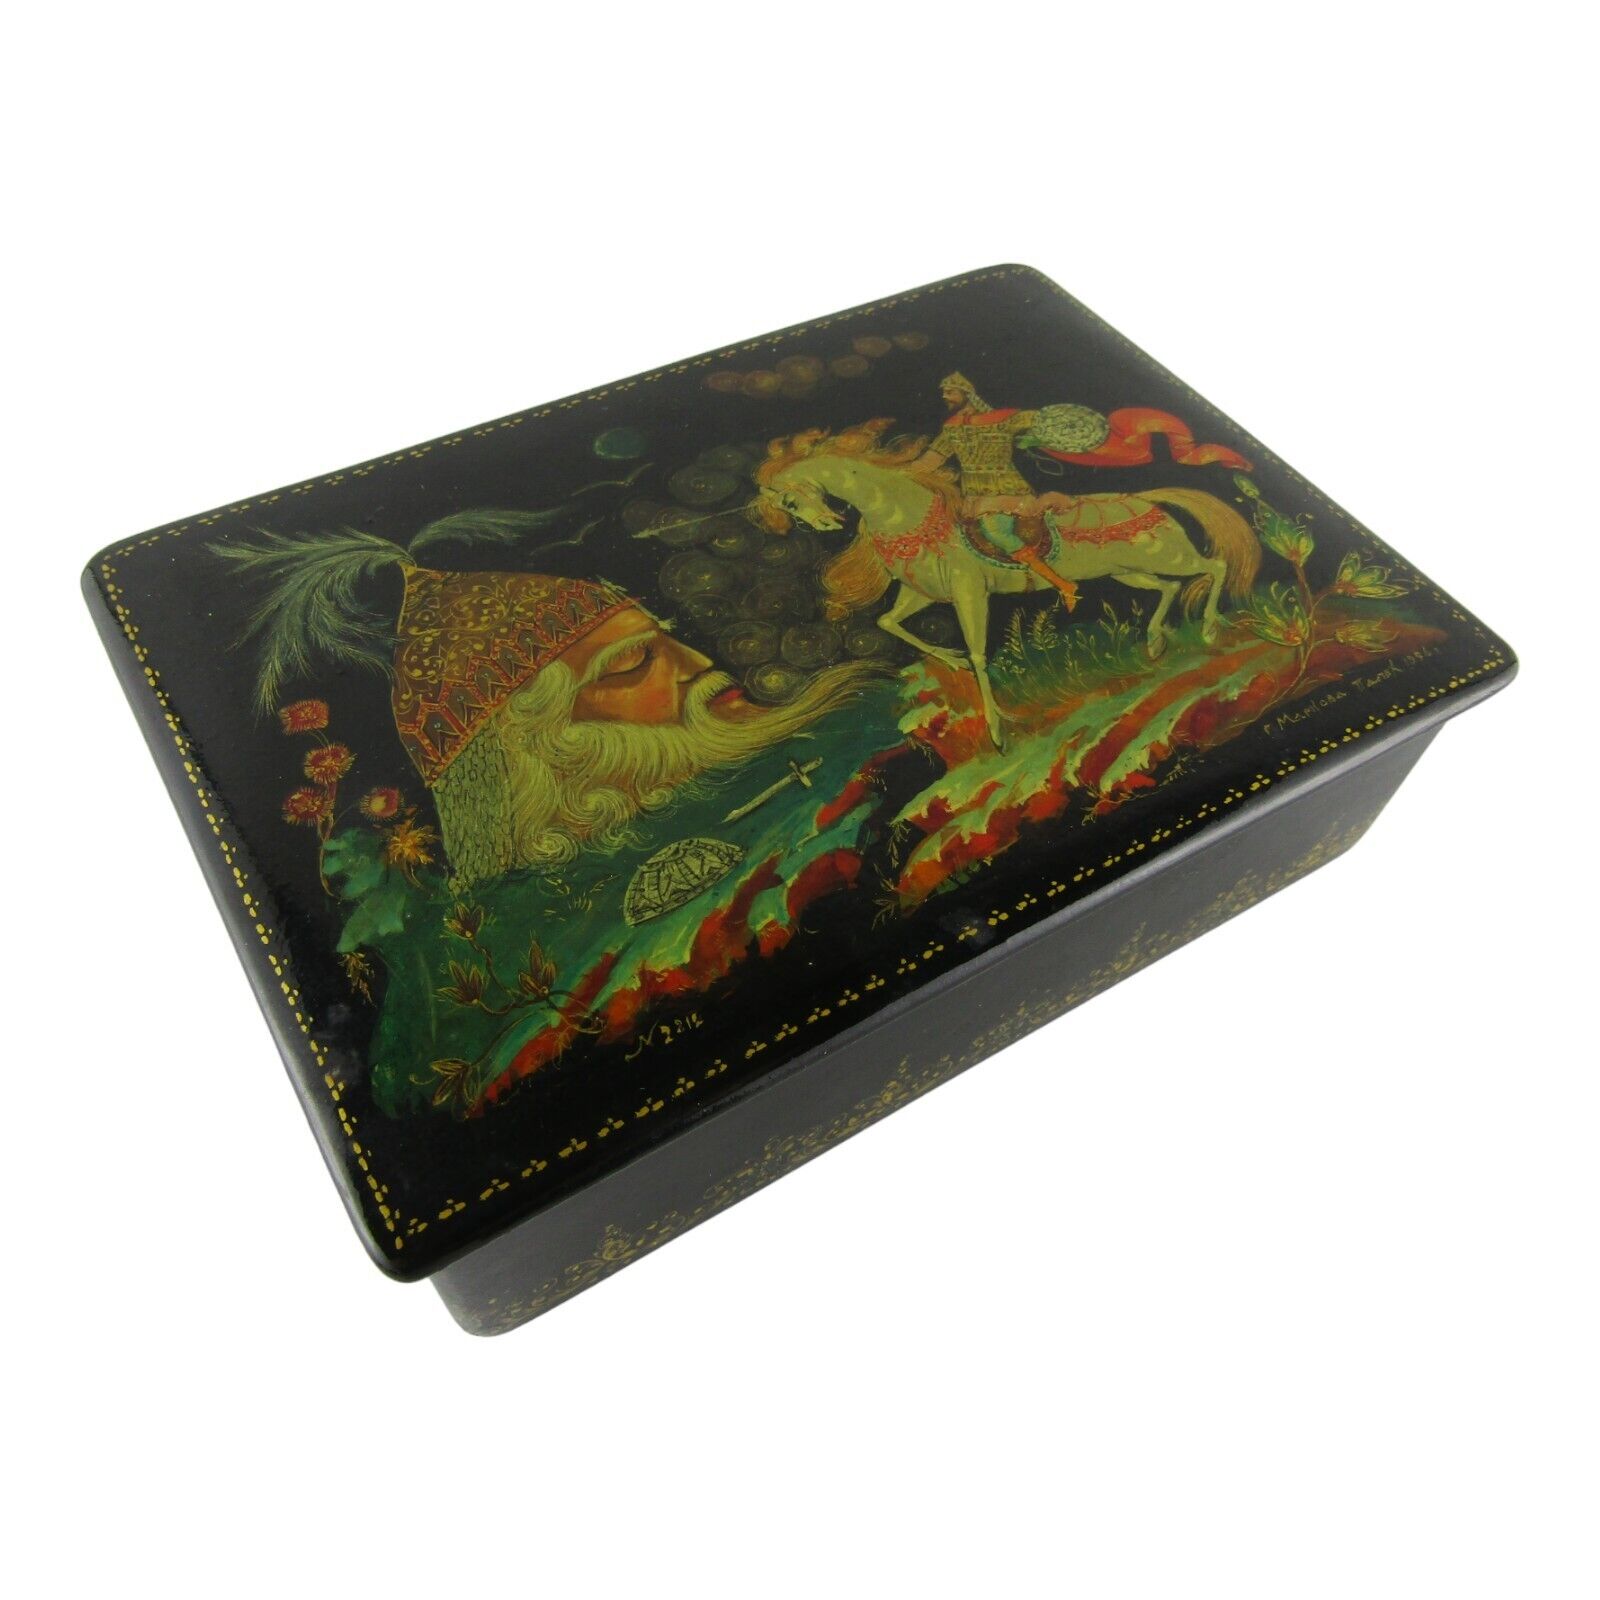 Vintage Russian Markova Palekh Signed Lacquer Box USSR 1976 6 Inch